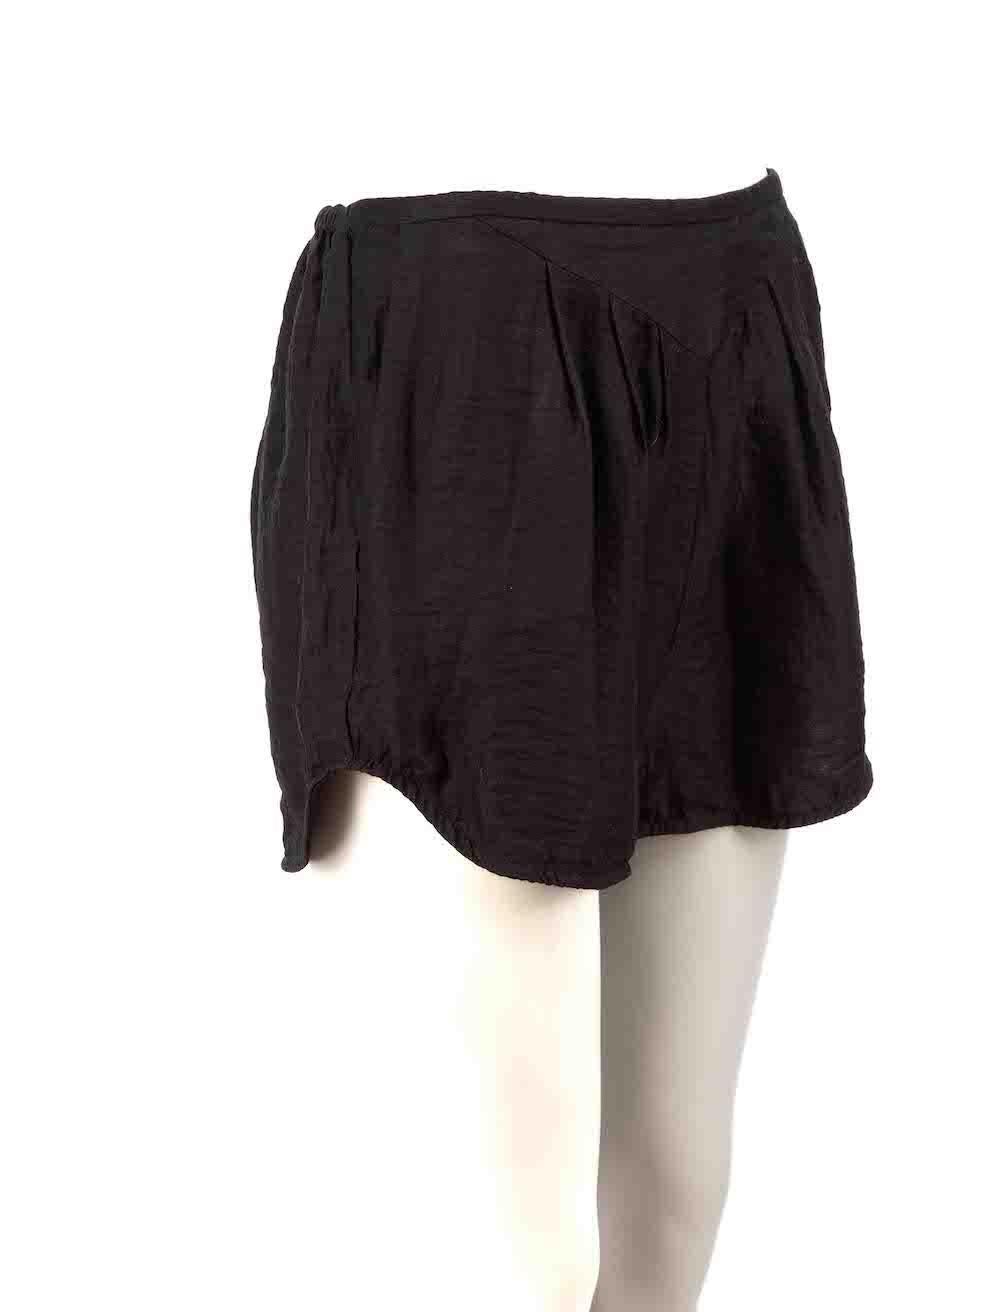 CONDITION is Very good. Hardly any visible wear to shorts is evident on this used Zimmermann designer resale item.
 
Details
Black
Viscose
Shorts
Elasticated waist
2x Side pockets

Made in China
 
Composition
41% Viscose, 41% Tencel, 18% Nylon

Care